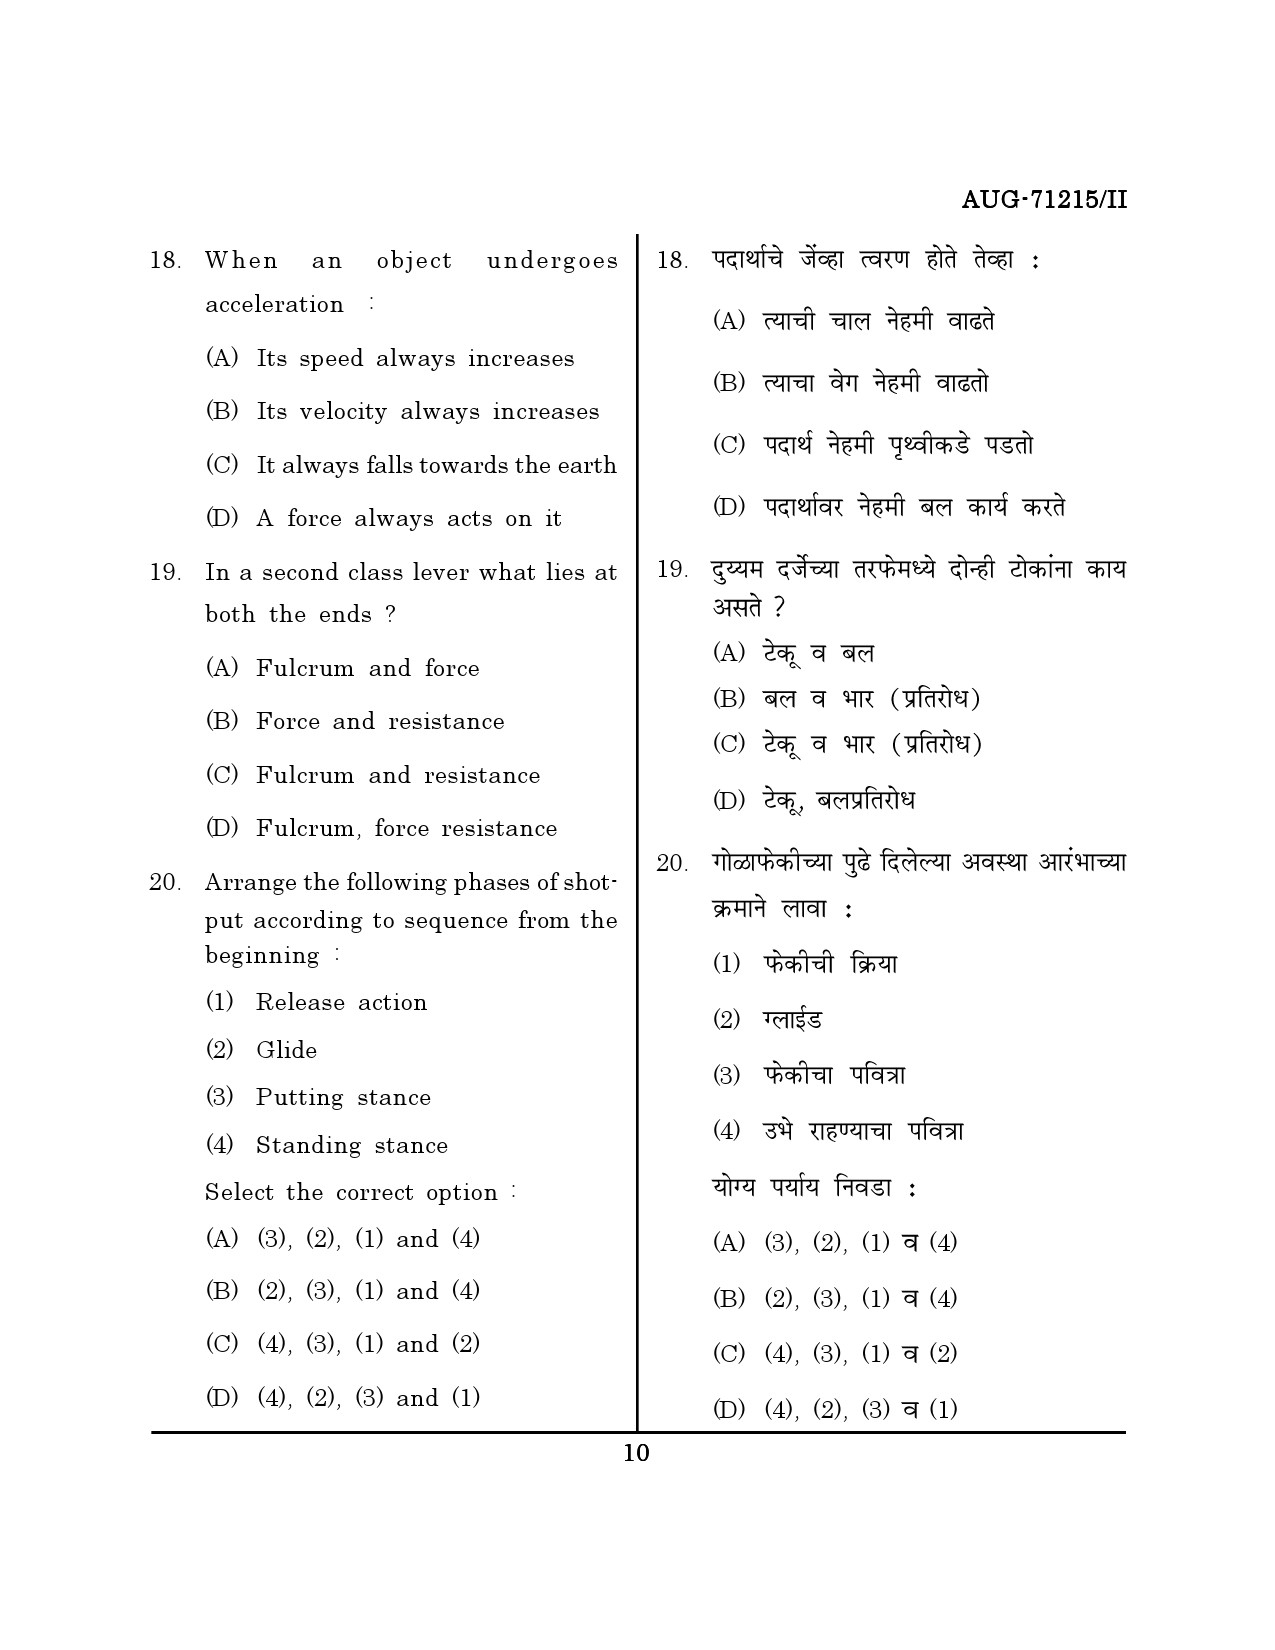 Maharashtra SET Physical Education Question Paper II August 2015 9